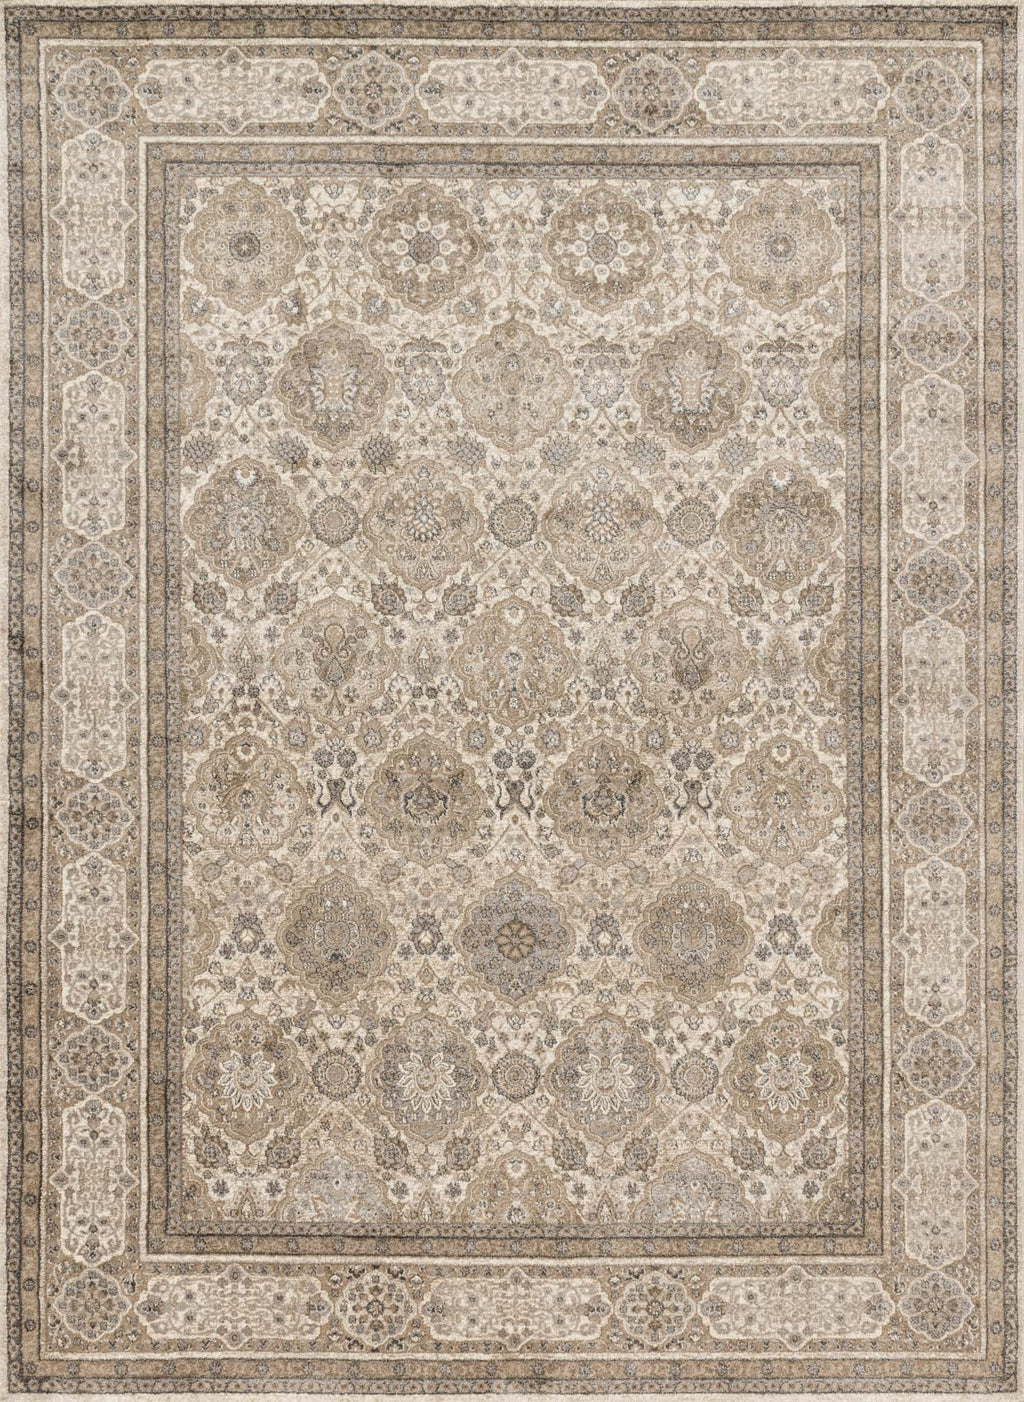 CENTURY Collection Rug  in  SAND / TAUPE Beige Runner Power-Loomed Polypropylene